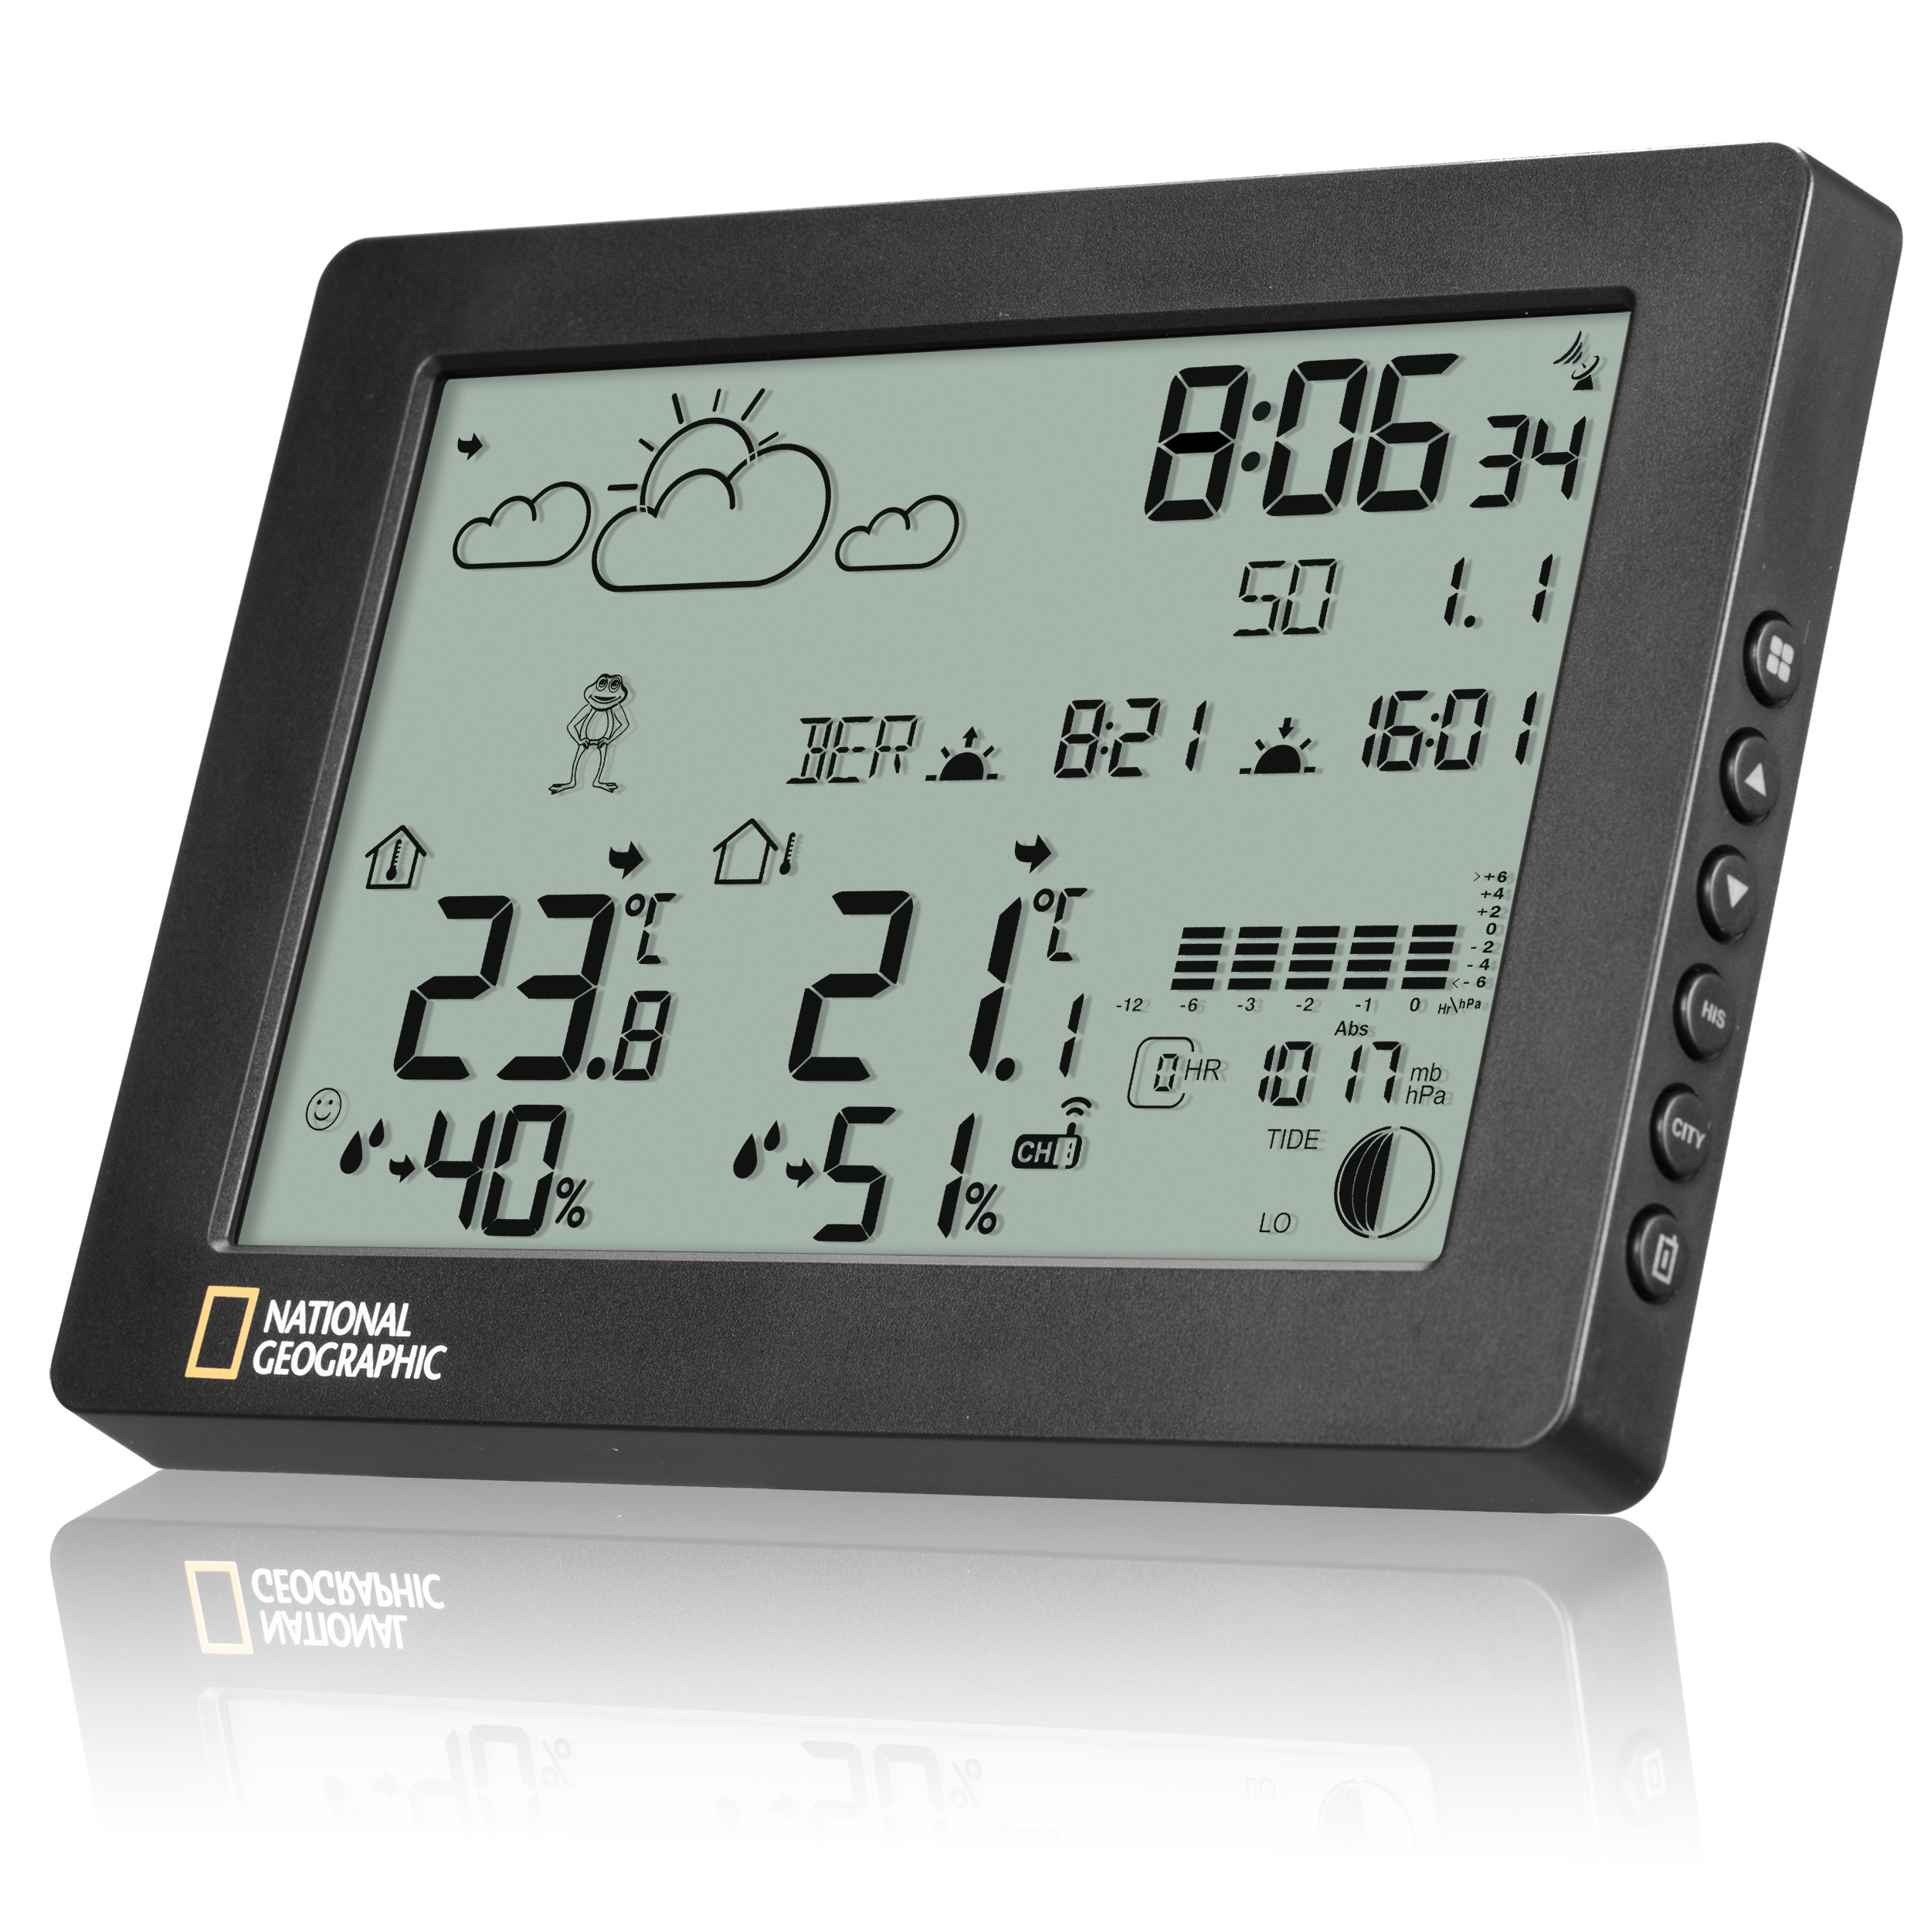 NATIONAL GEOGRAPHIC BaroTemp HZ weather station (Refurbished)